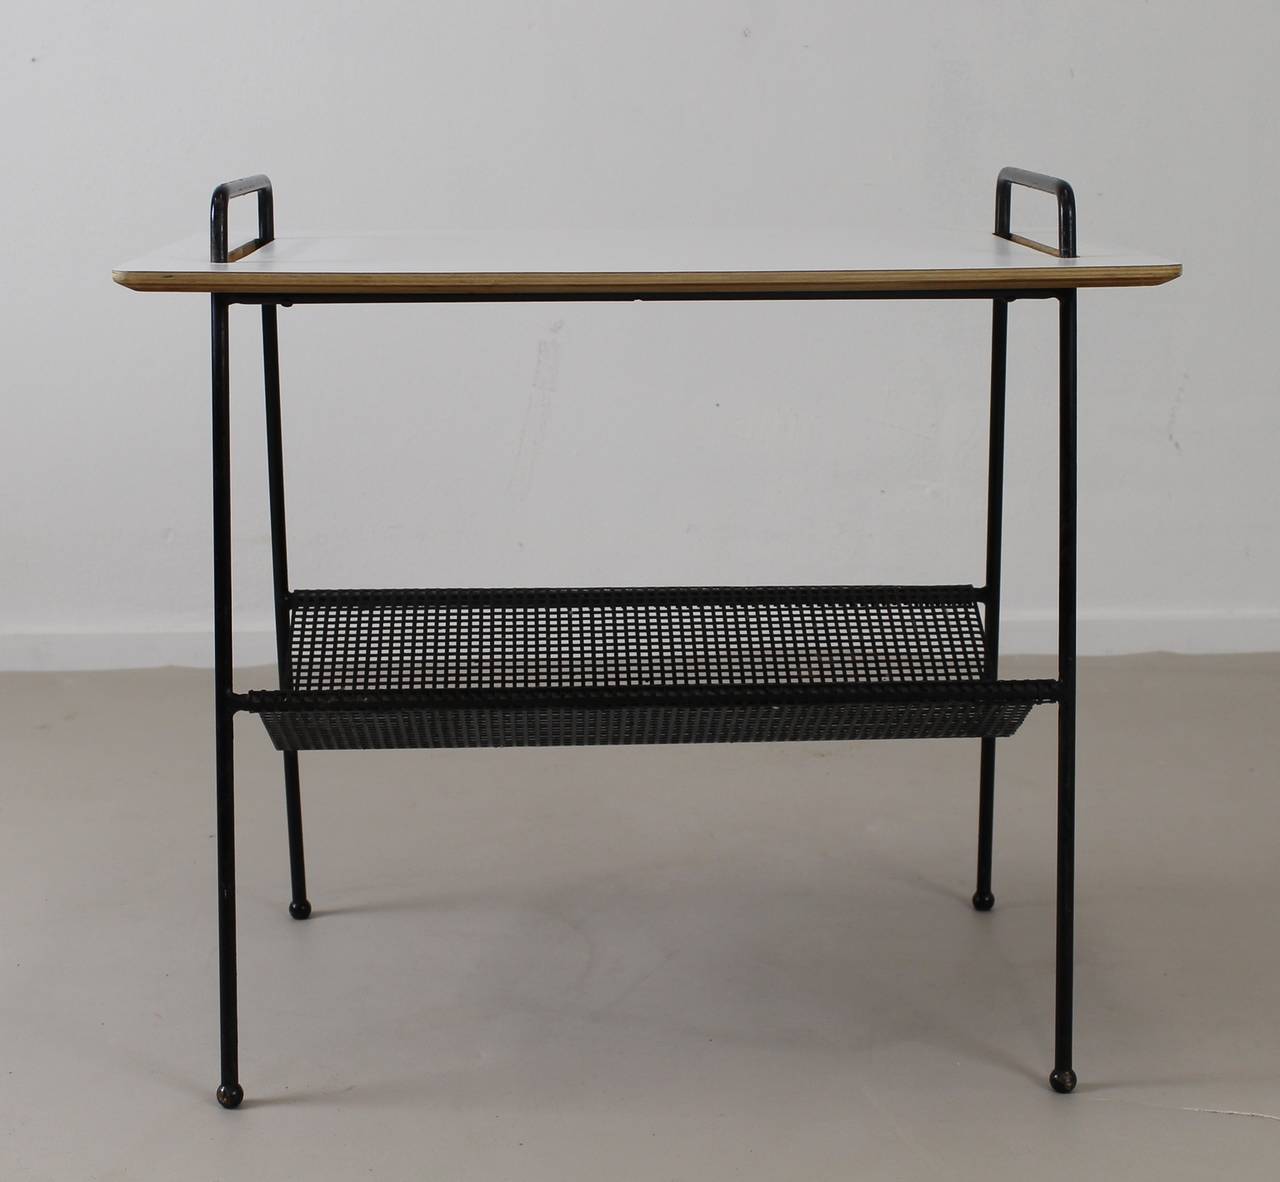 Scarce type of side table with presentation layer.
Black metal perforated magazine layer.
White laminated top.
Designer: Cees Braakman.
Model: TM 04.
Marked with Meubles Pastoe Bruxelles.

Express parcel shipment advised